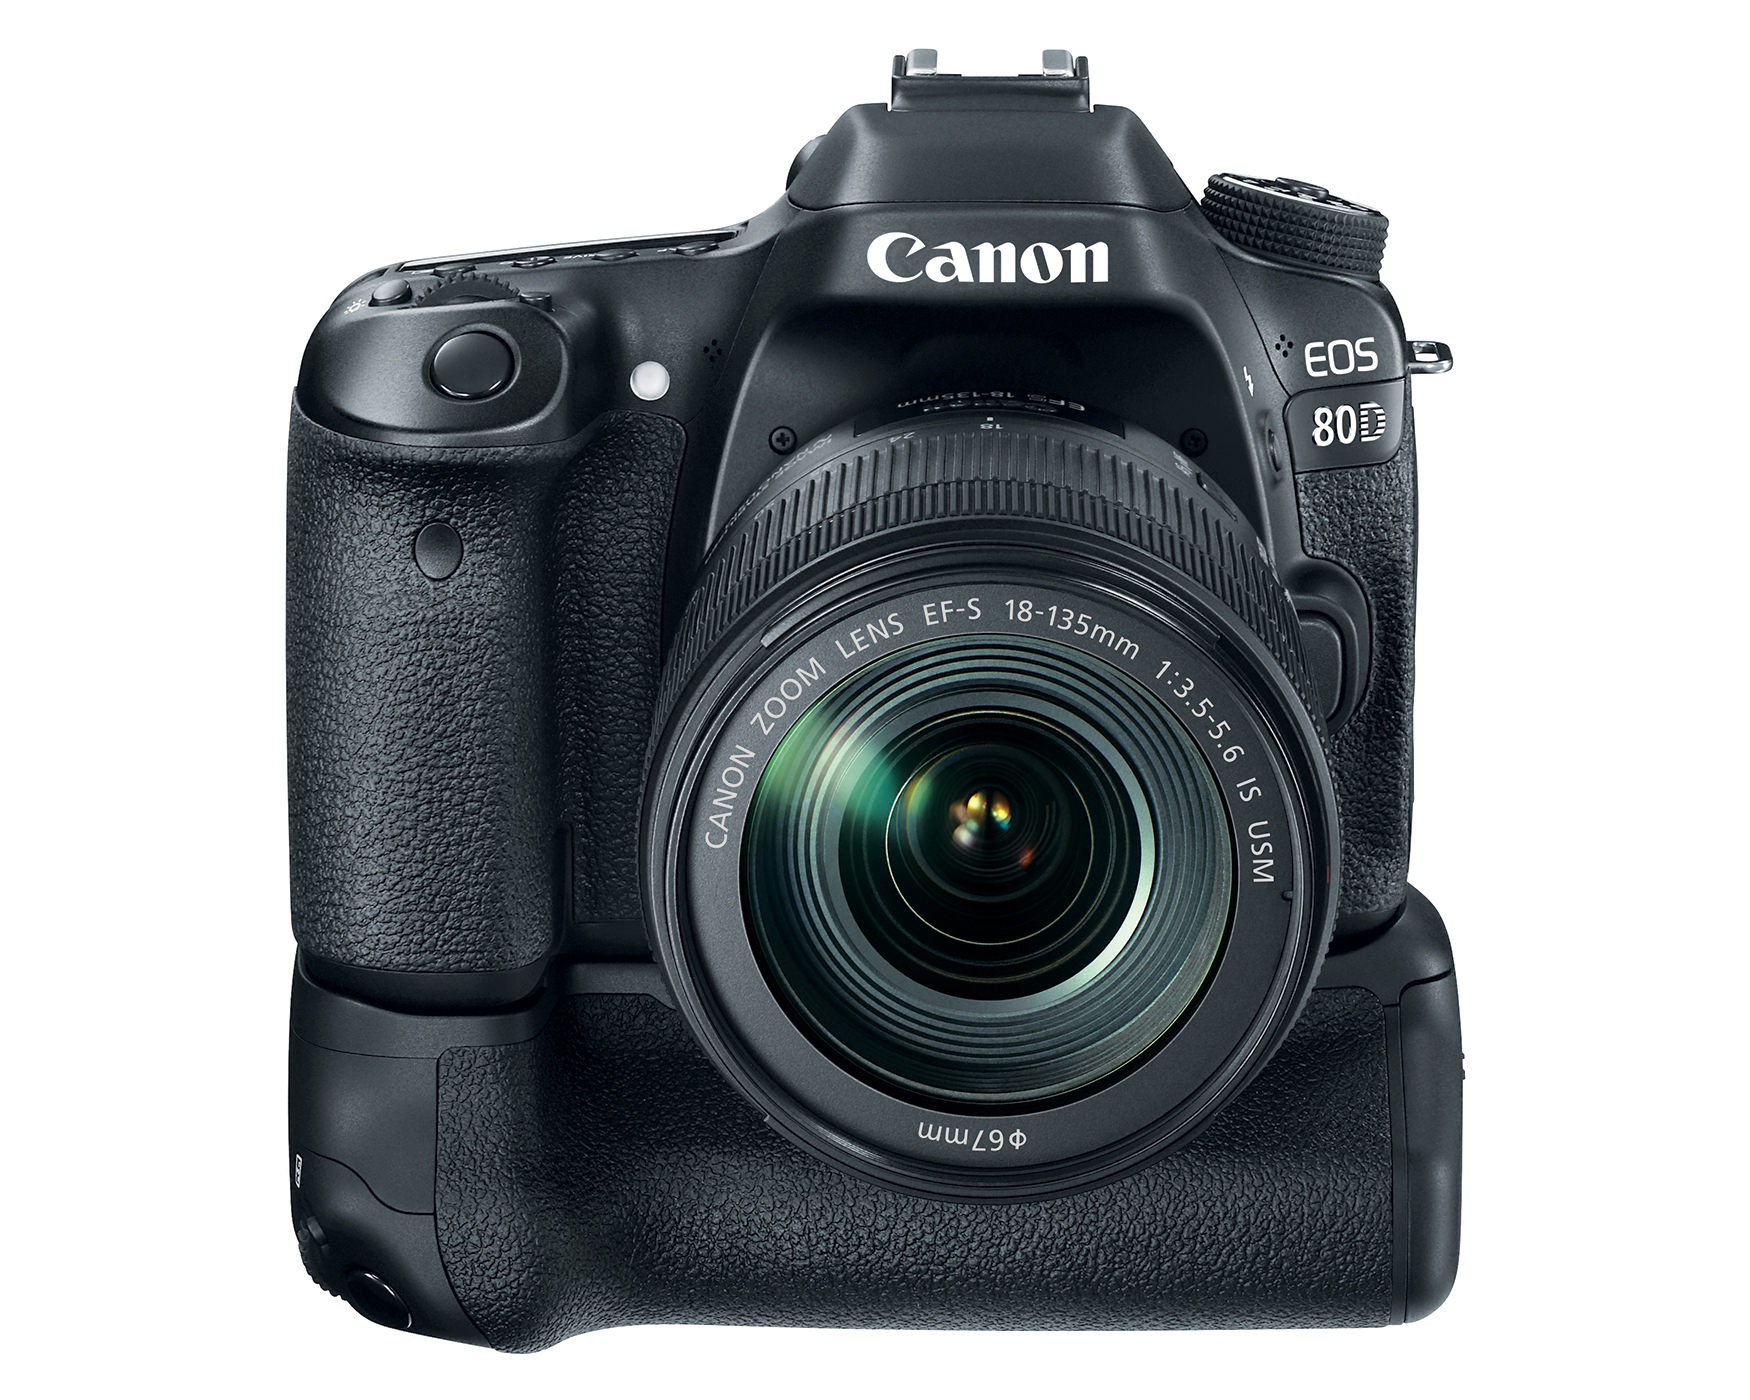 The Canon 80D is Targeting the Semi-Professional Photographer